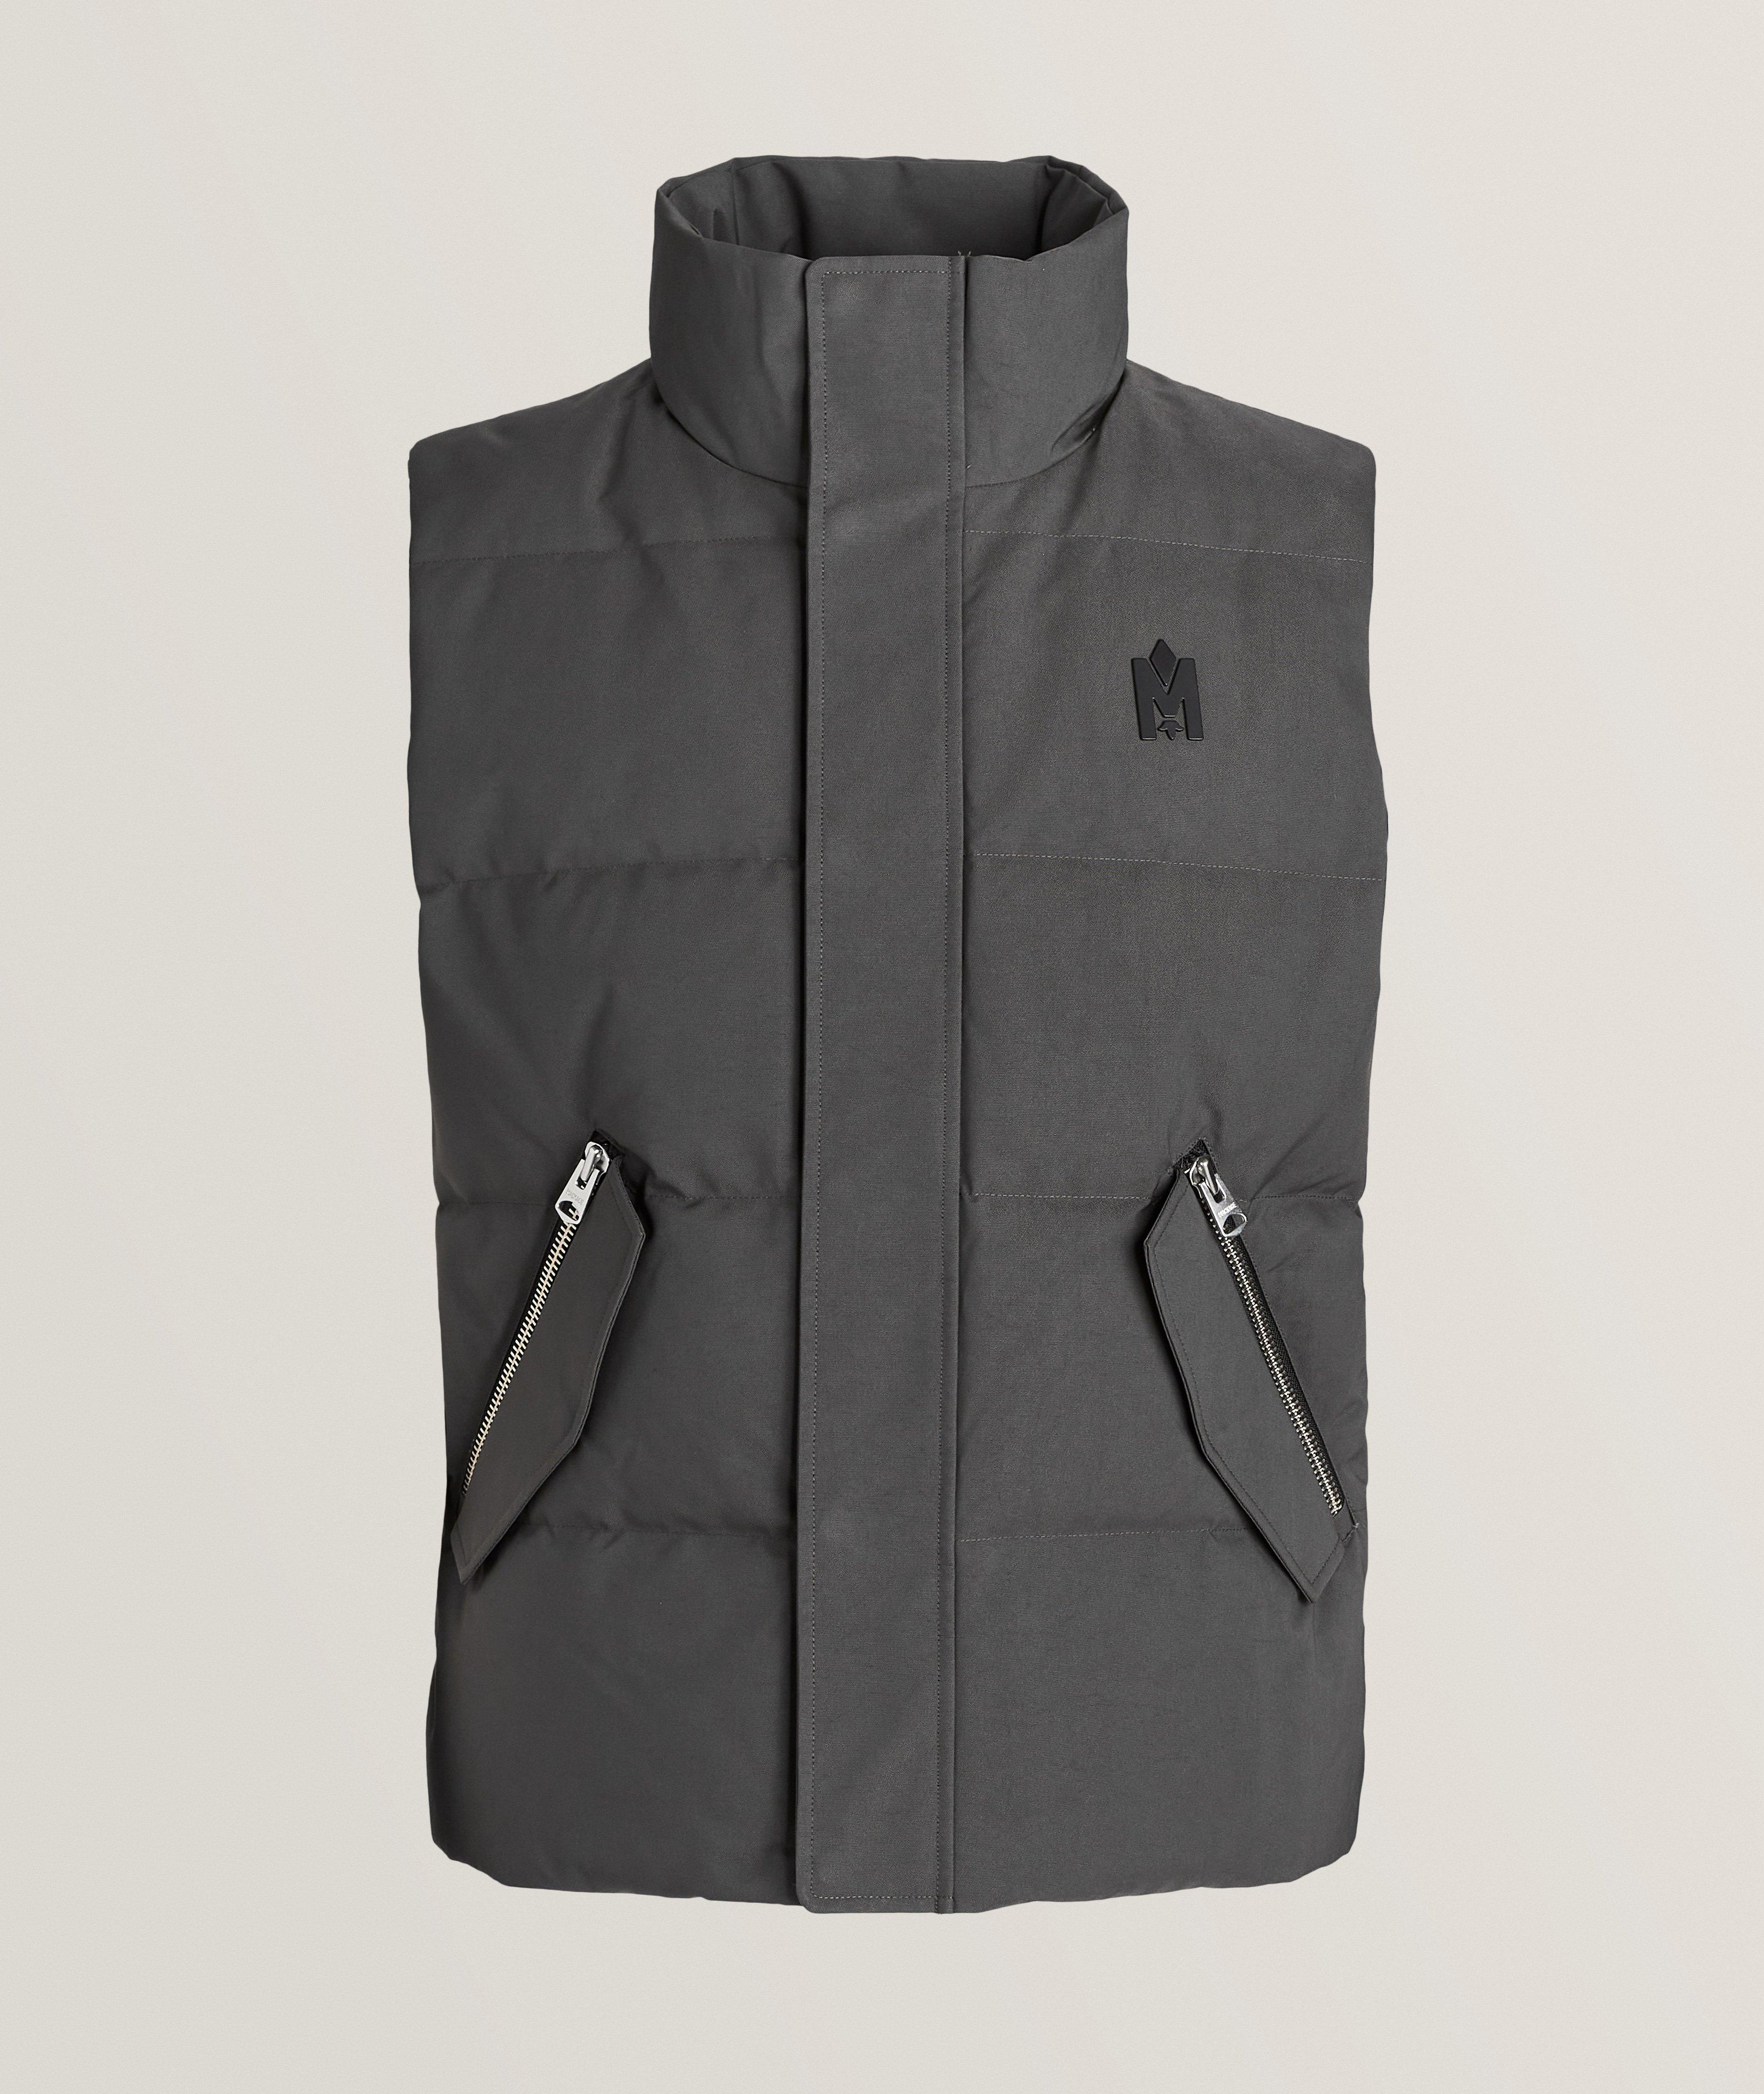 Joseph Quilted Down Vest image 0